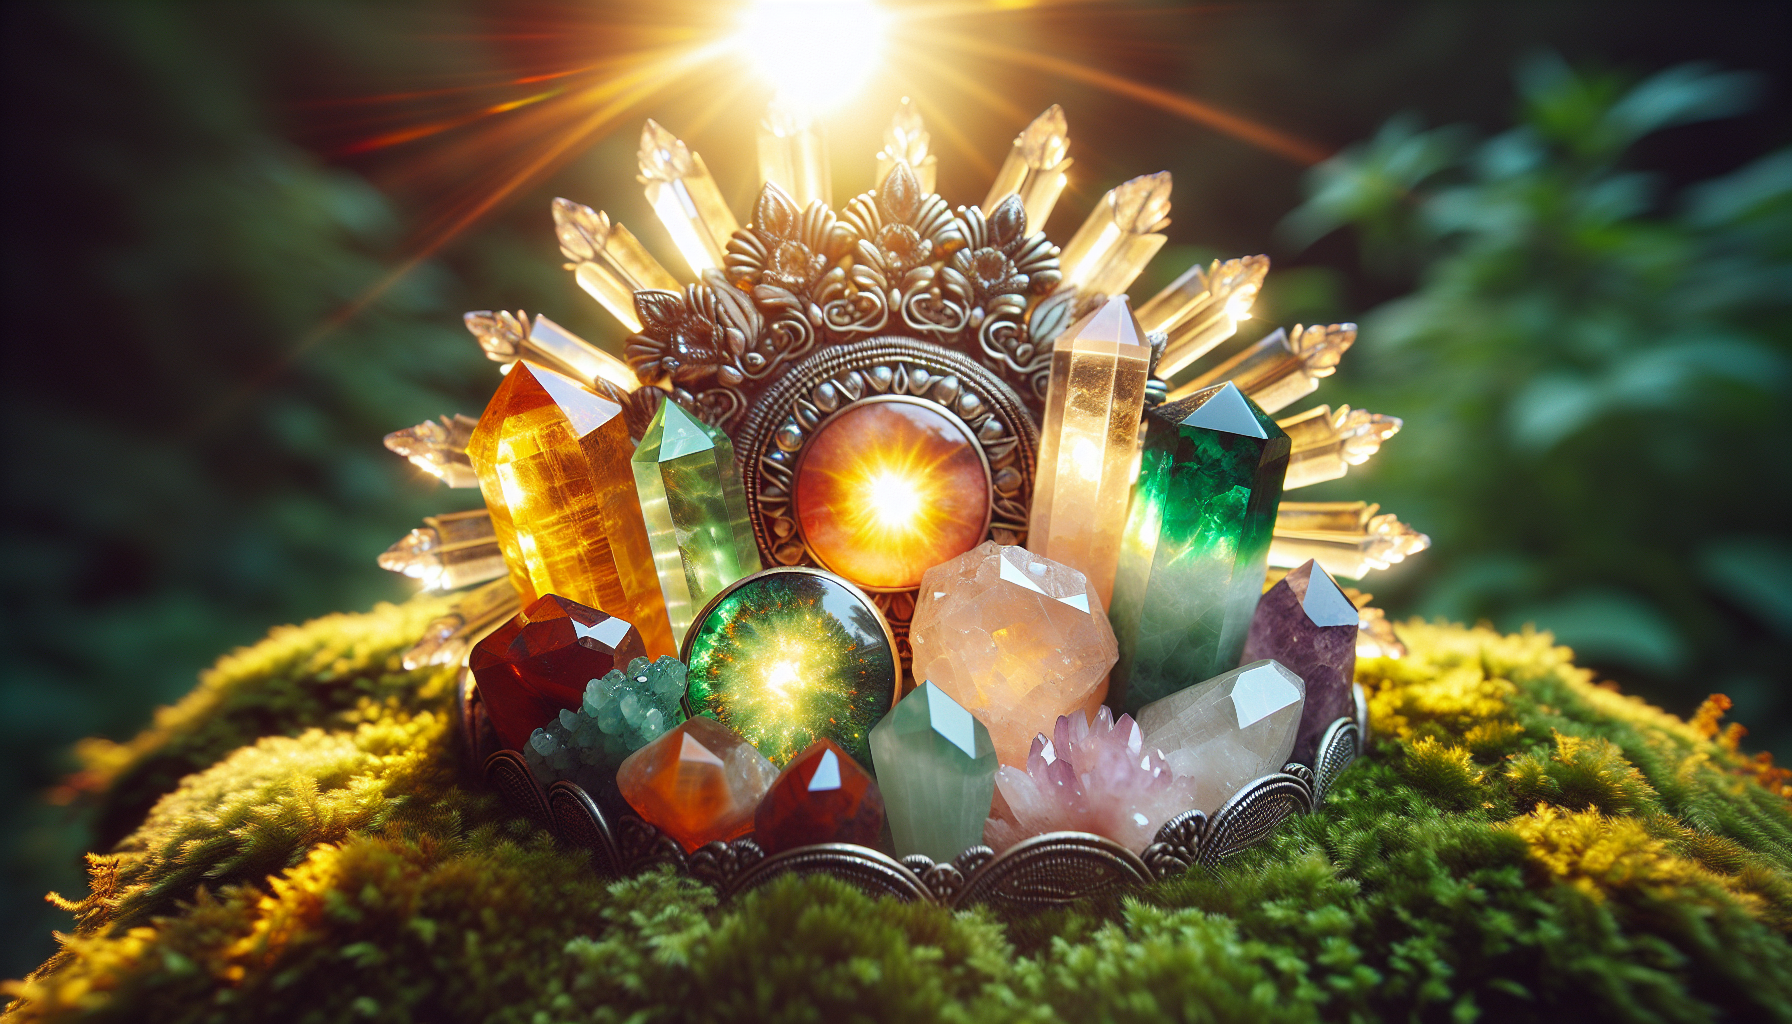 Popular healing crystals and their sun safety